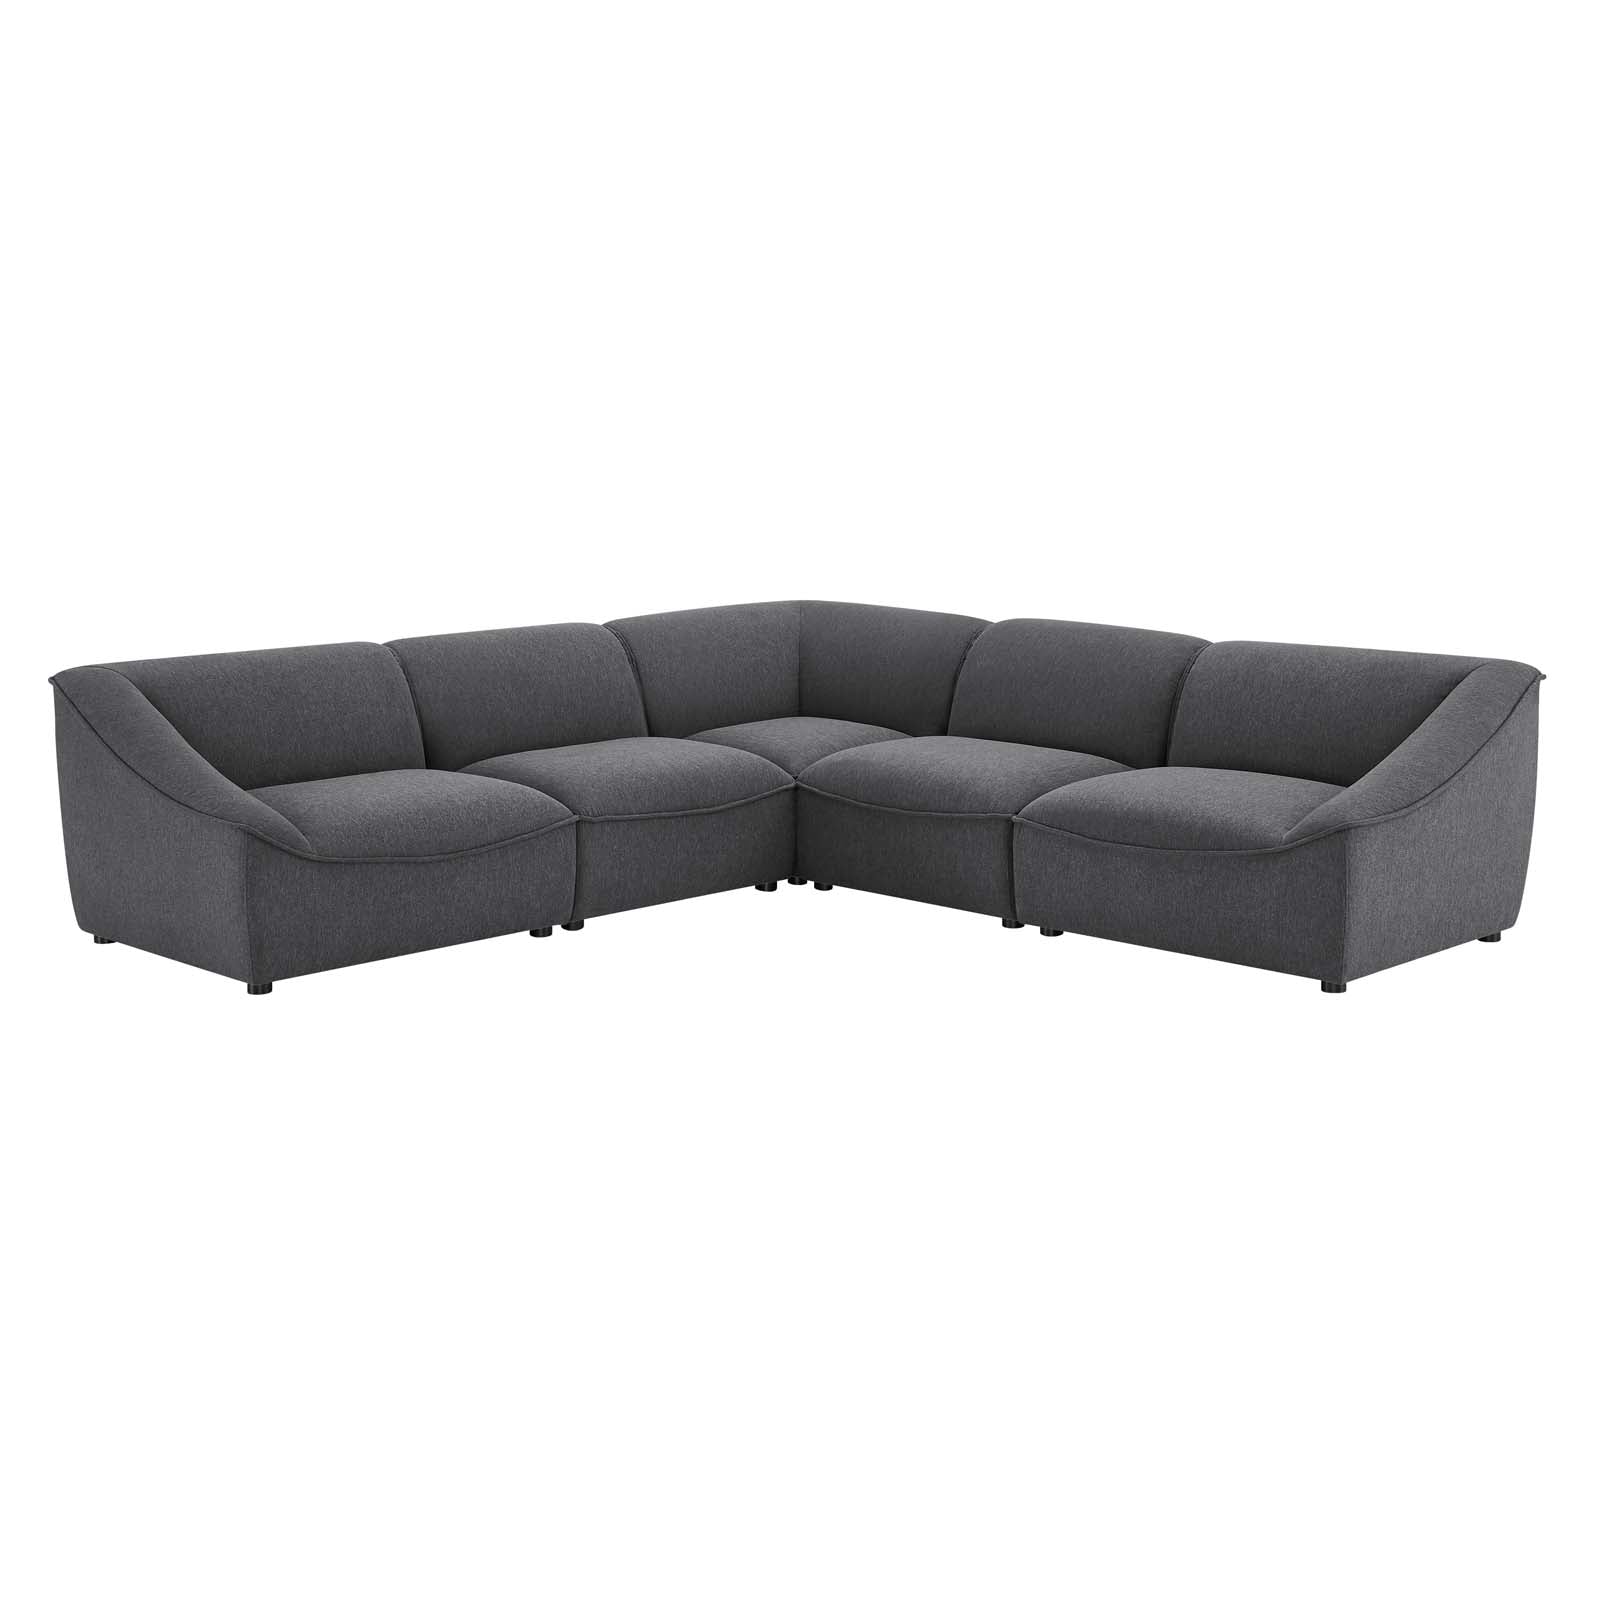 Modway Sectional Sofas - Comprise-5-Piece-Sectional-Sofa-Charcoal